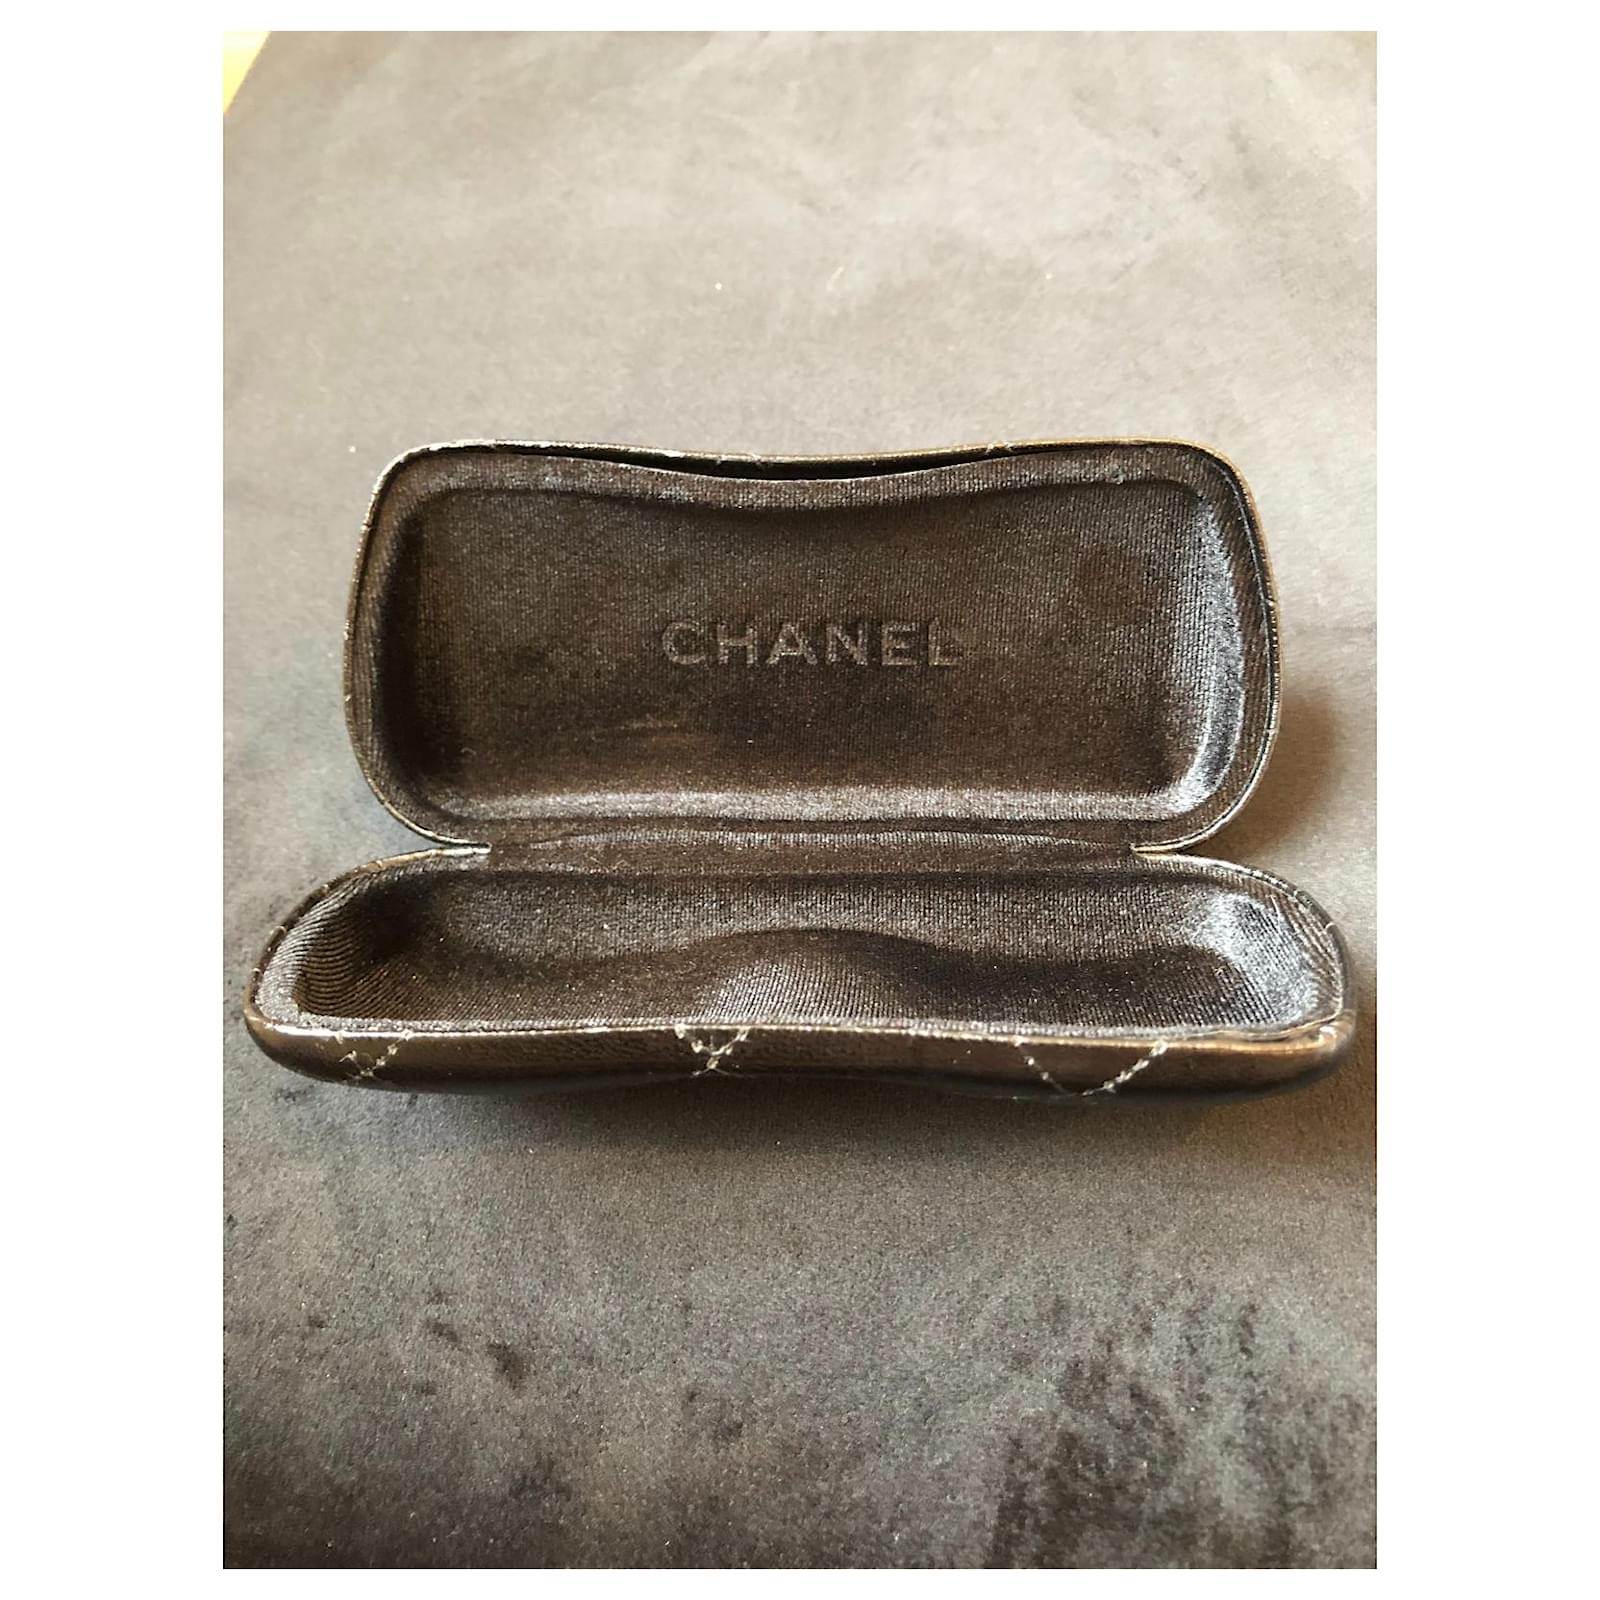 Chanel glasses with case and model box 3197-H c.1101